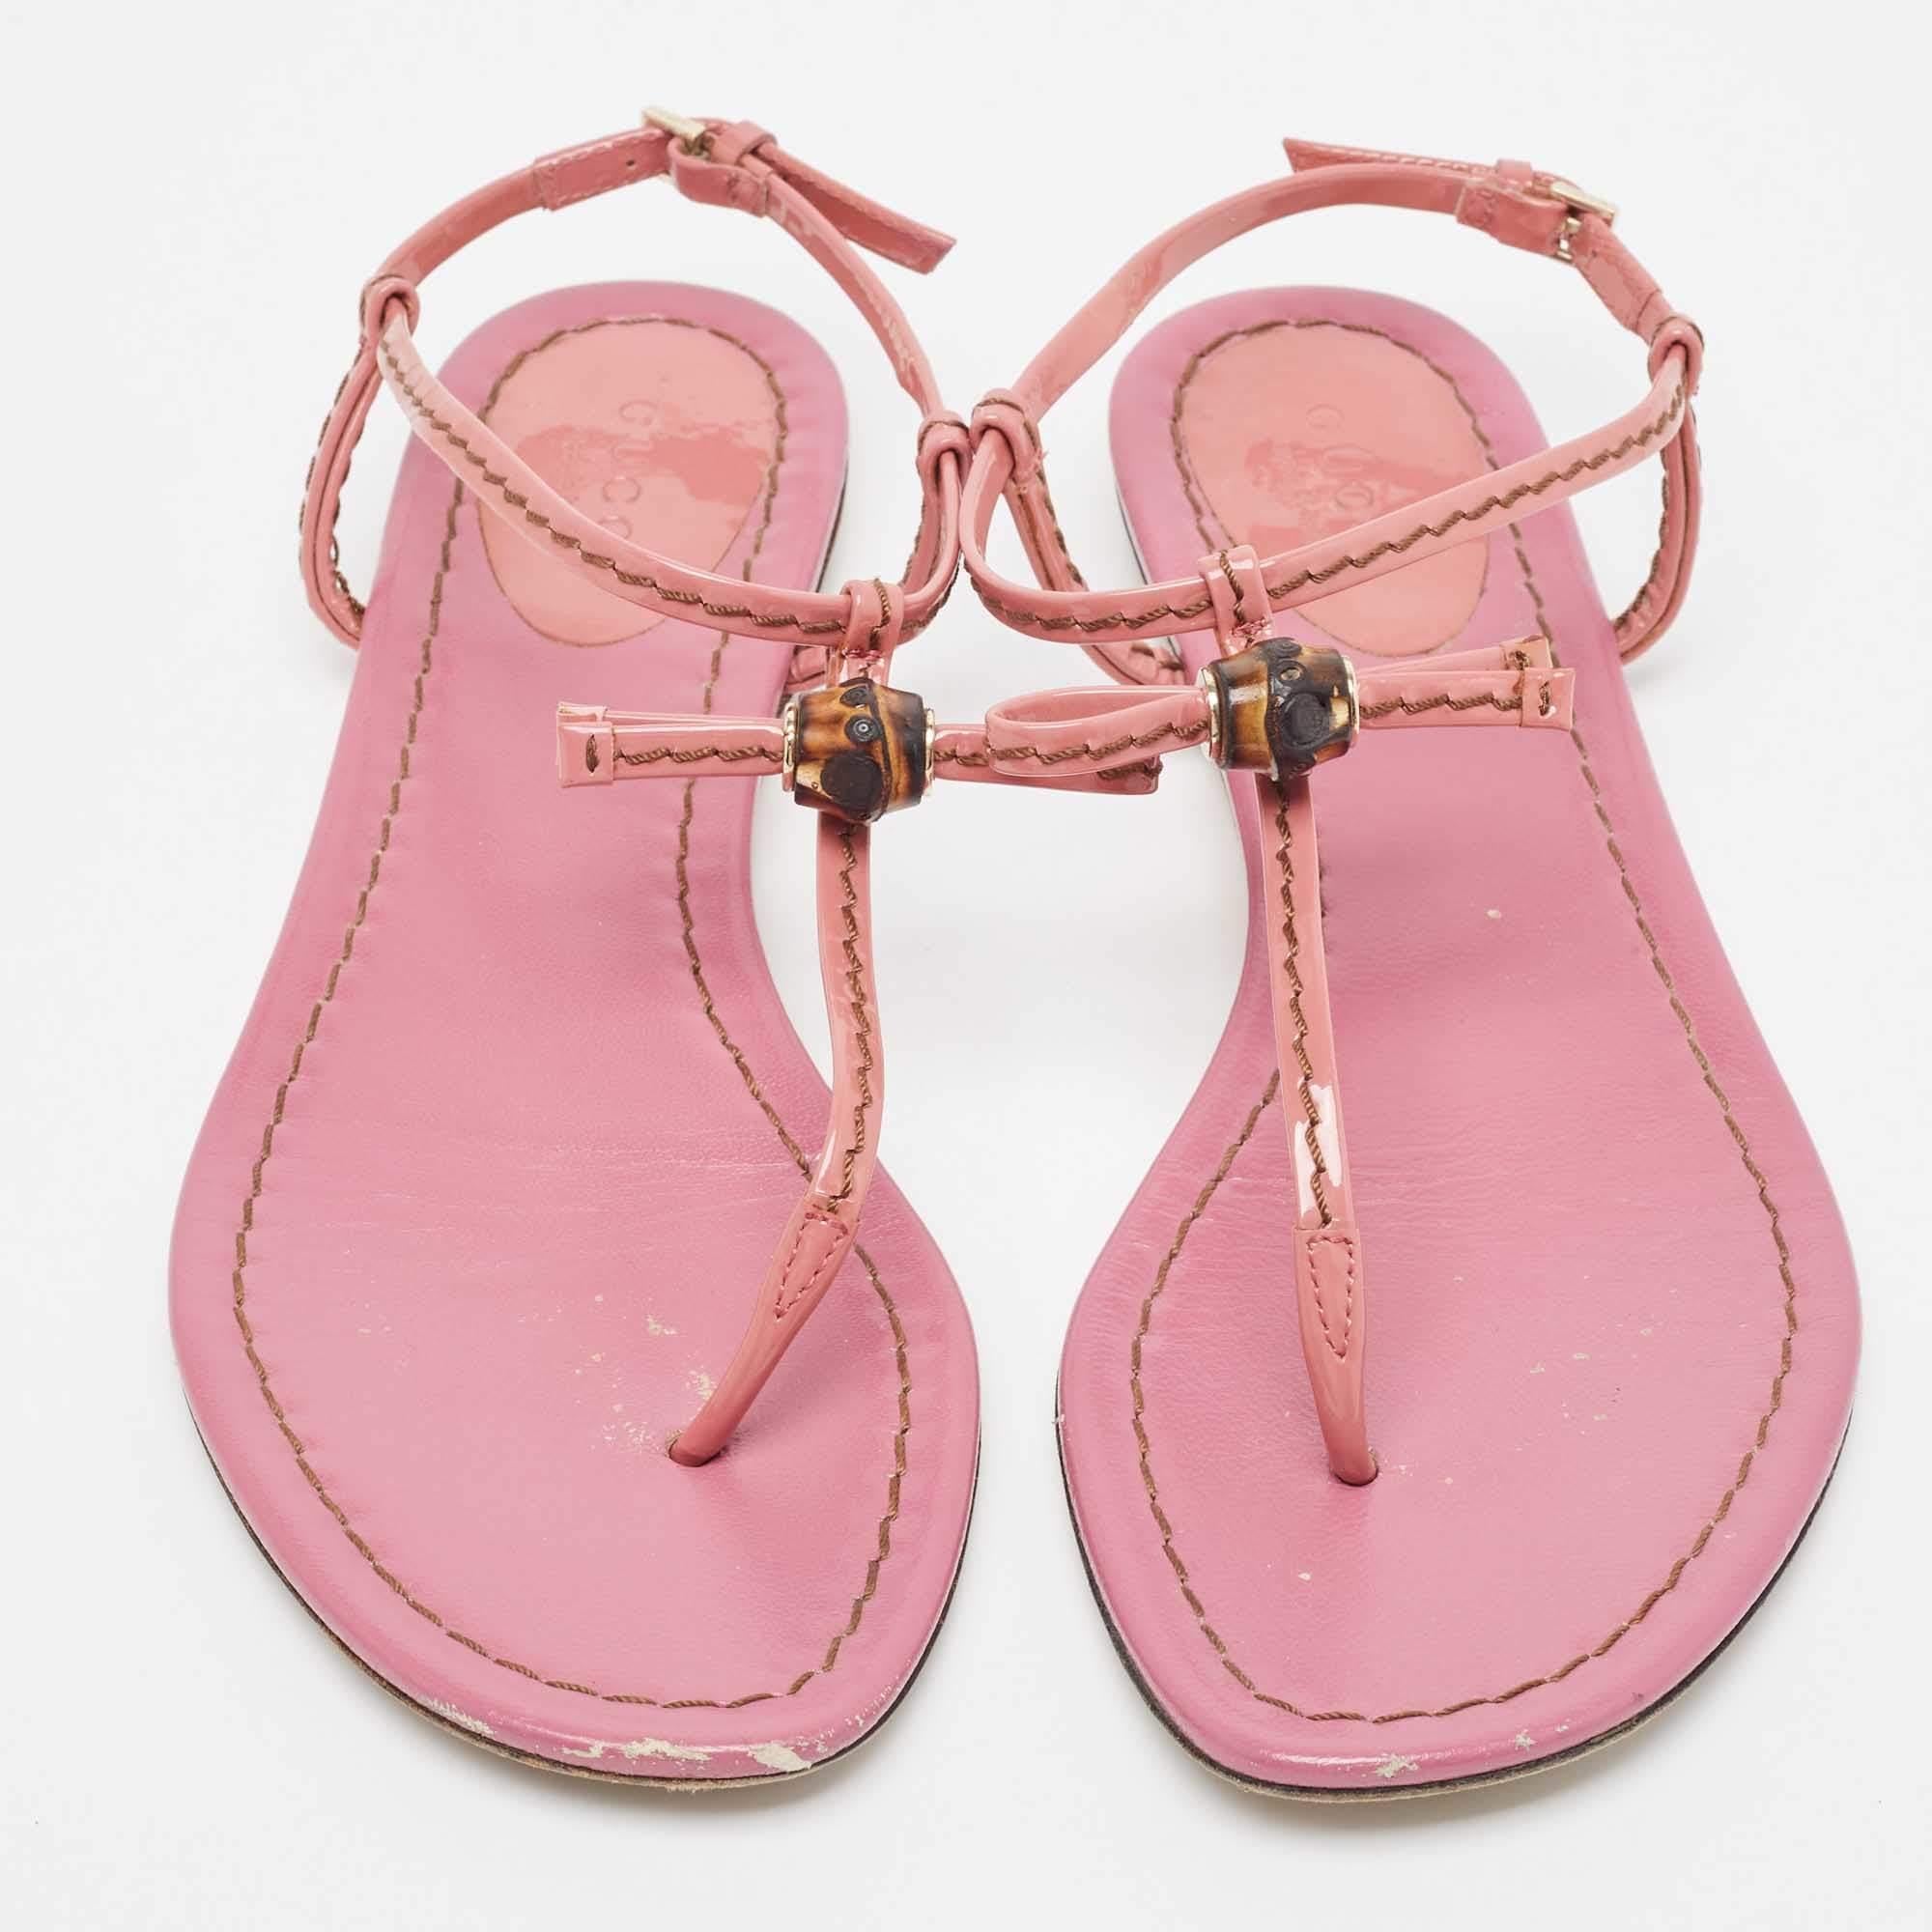 These sandals will offer you both luxury and comfort. Made from quality materials, they come in a versatile shade and are equipped with comfortable insoles.

Includes: Original Dustbag

